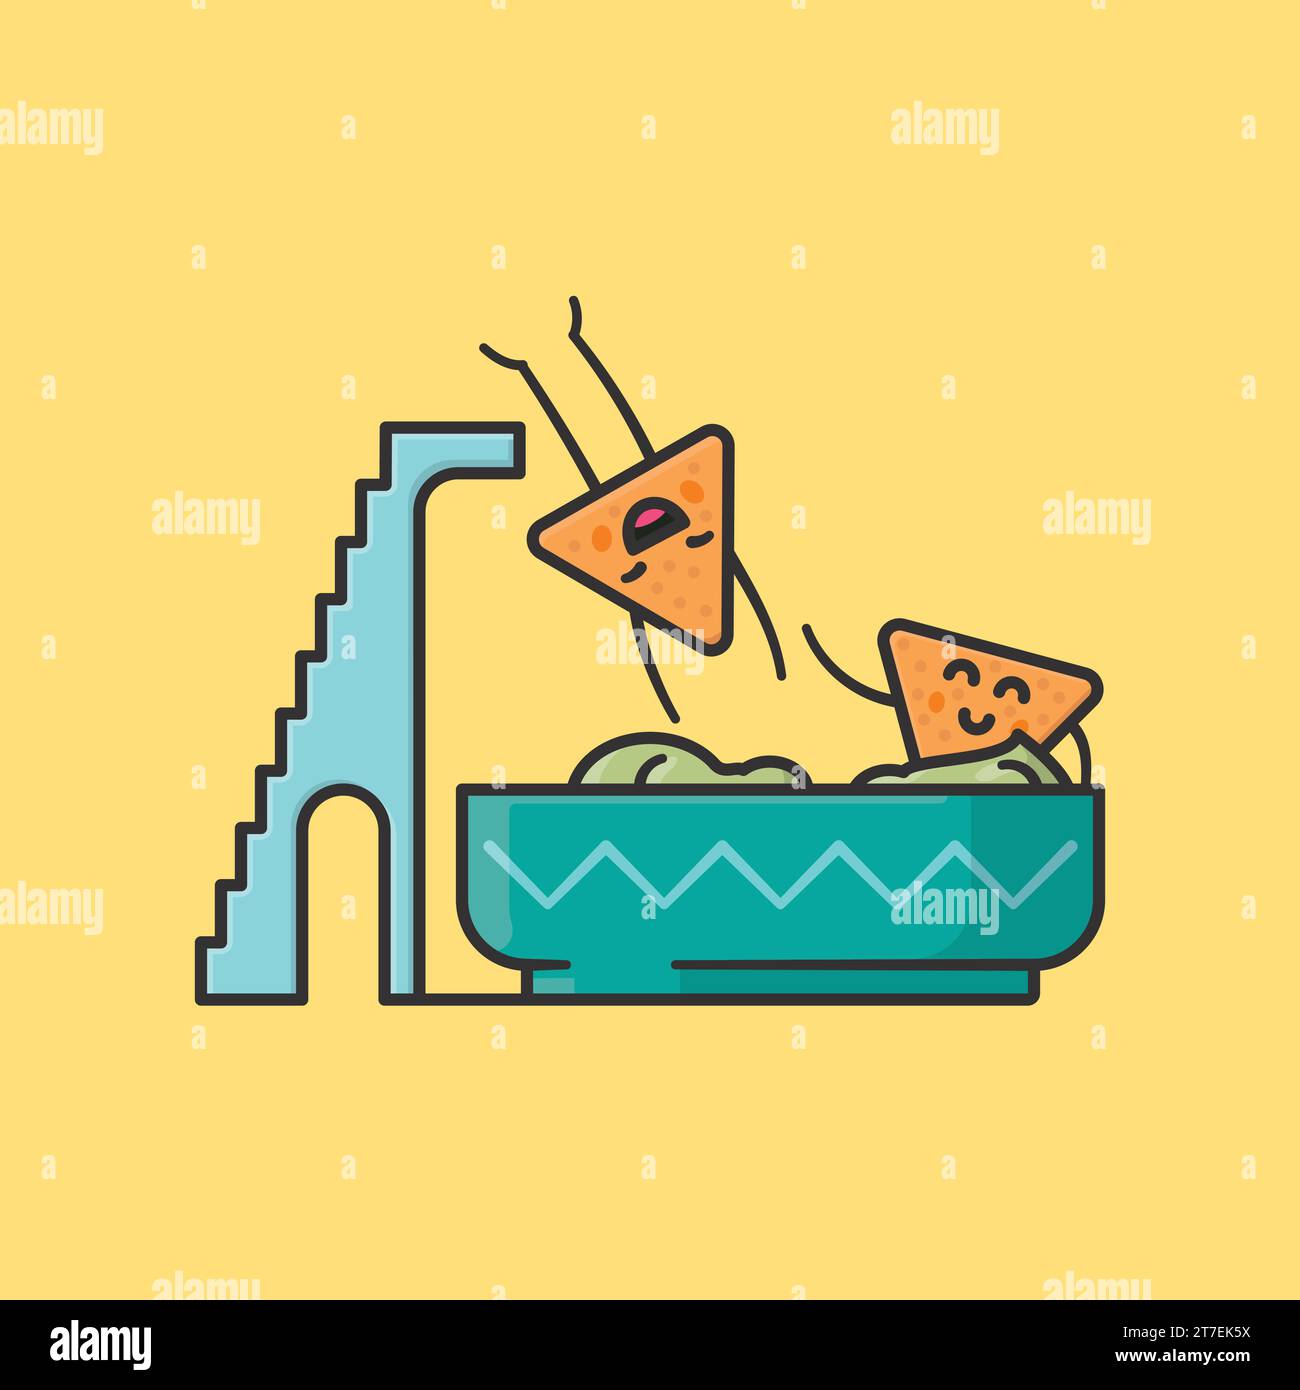 Tortilla chip jumping into pool of guacamole cartoon vector illustration for Tortilla Chip Day on February 24 Stock Vector